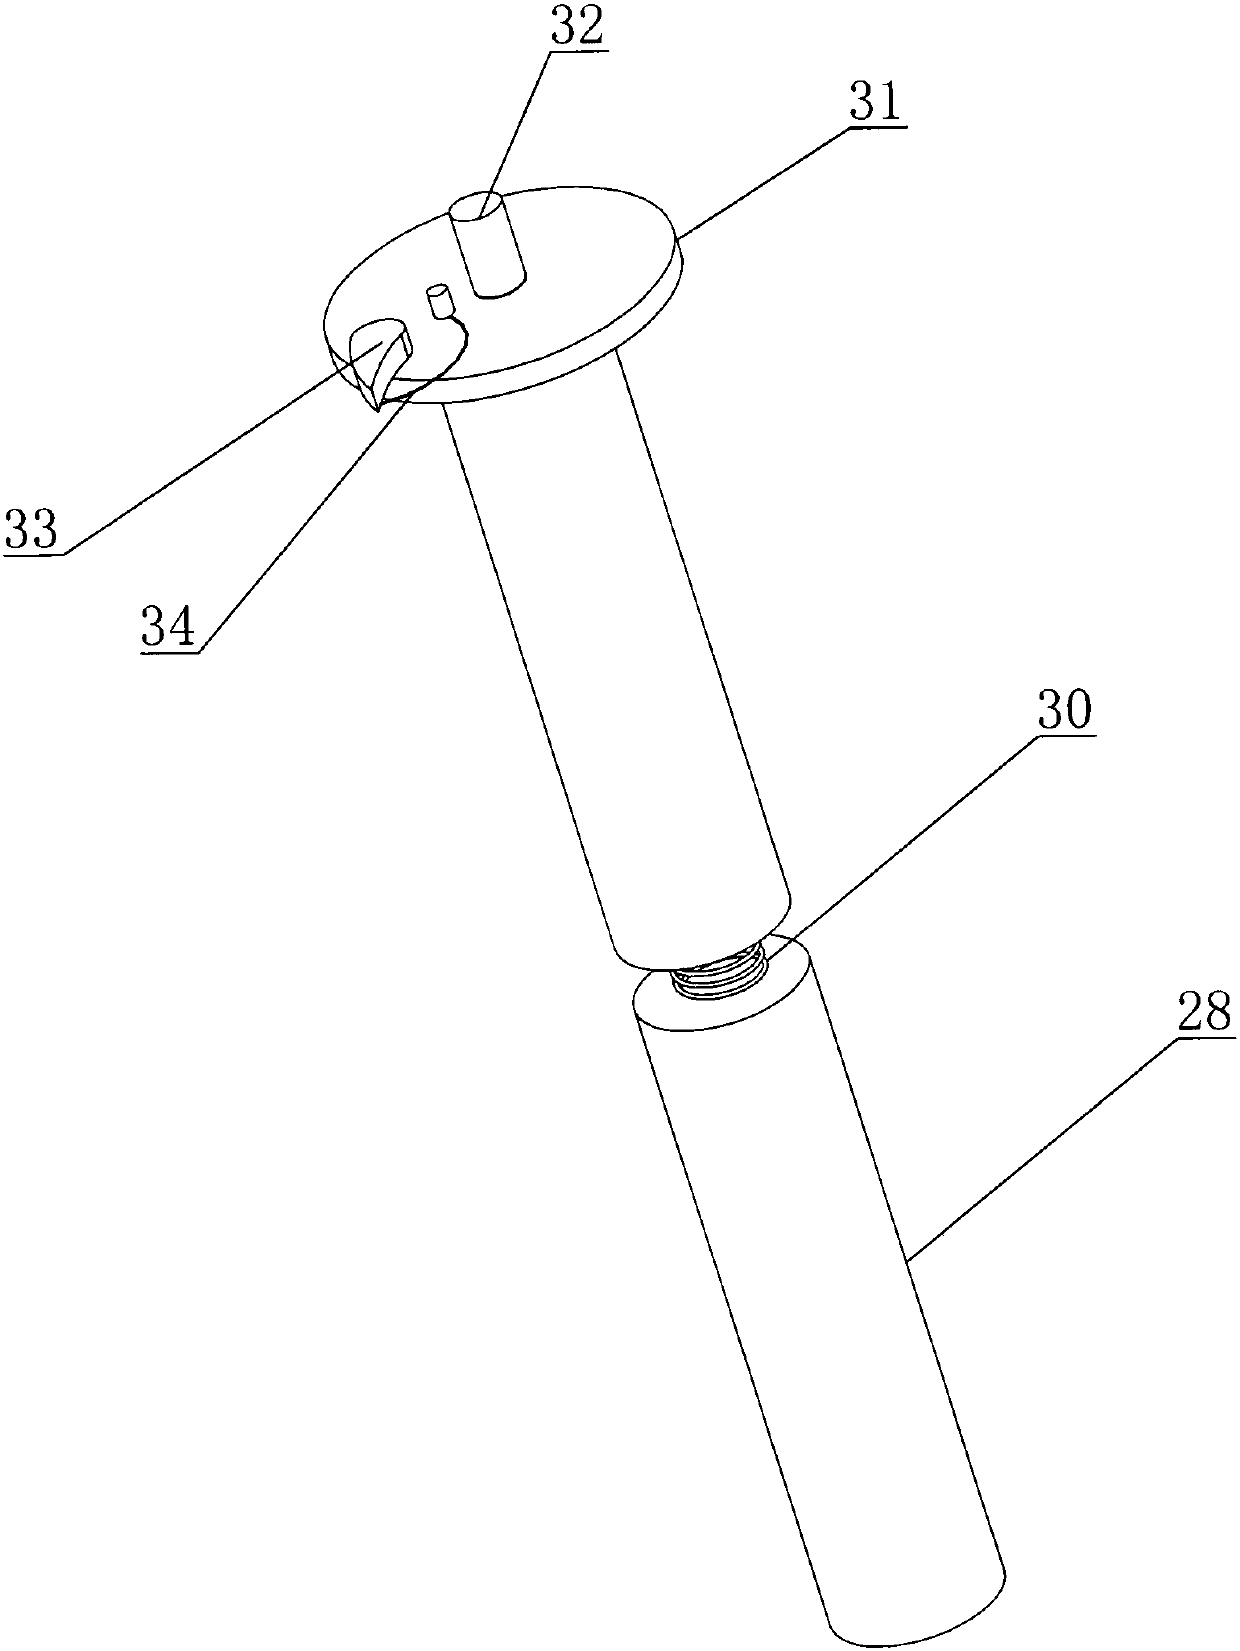 Automatic ball collection device for basketball